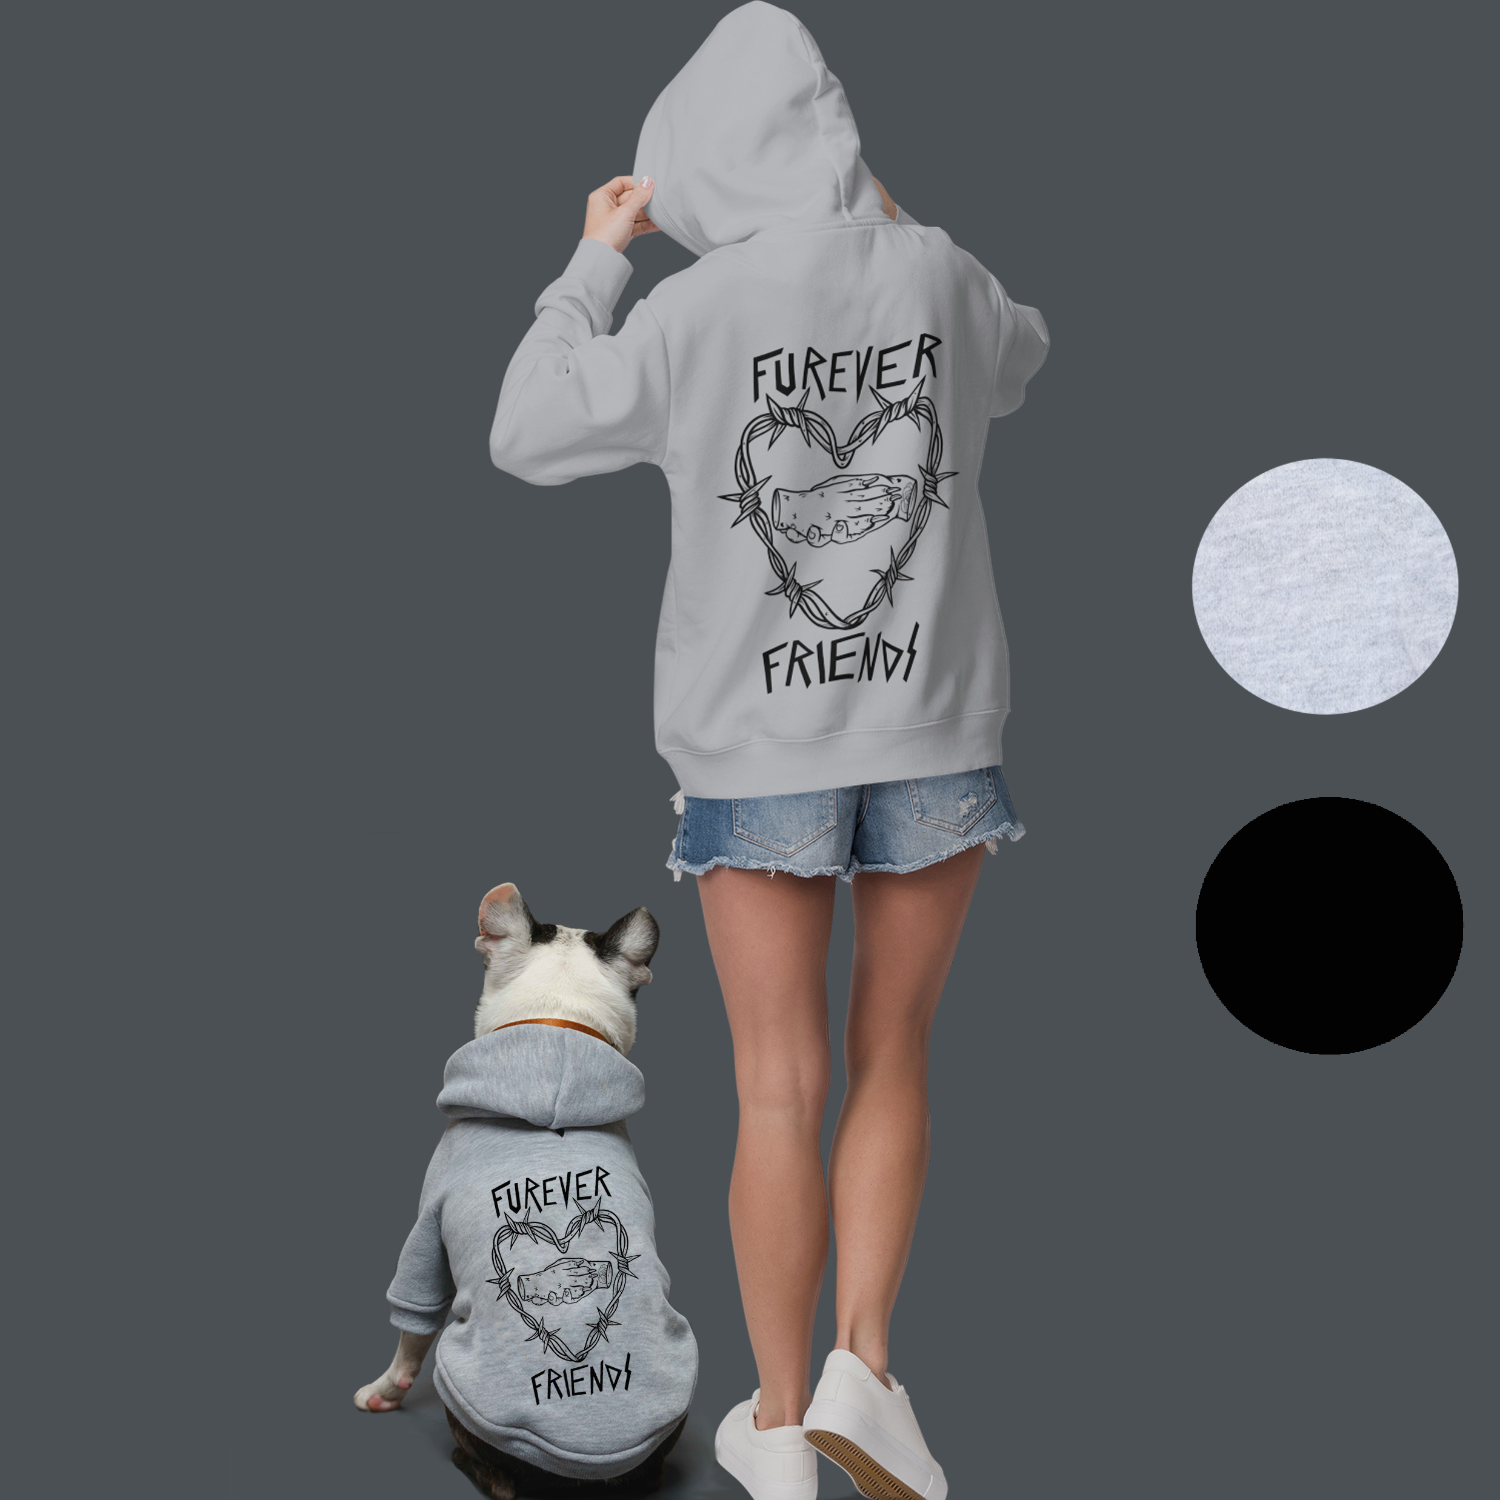 Dog and human matching hoodies, gift for dog lovers. Dog hoodie with matching human hoodie, furever friends rescue dog print